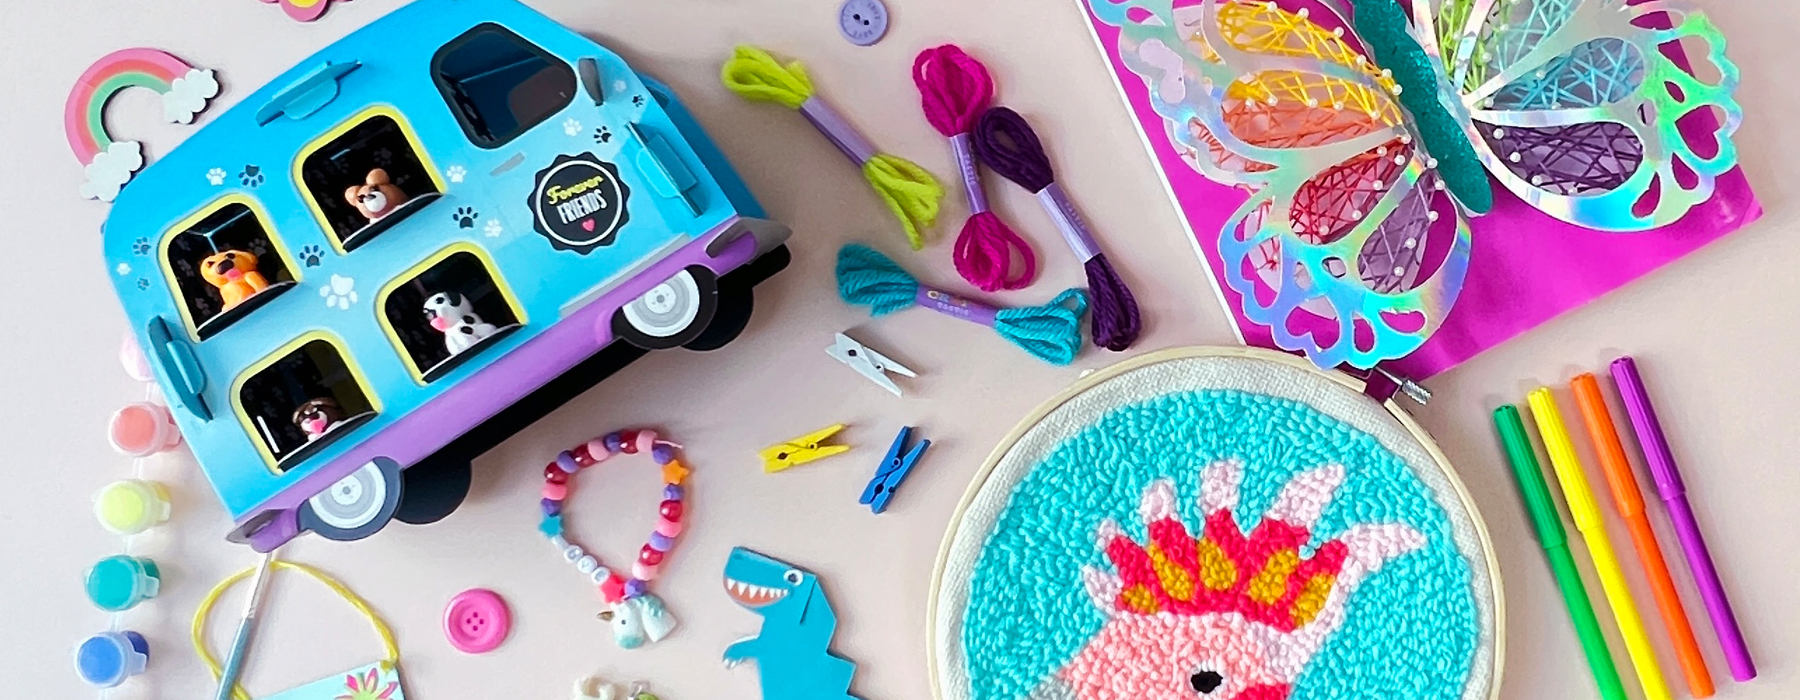 Best DIY craft kits for stay home activities in Singapore